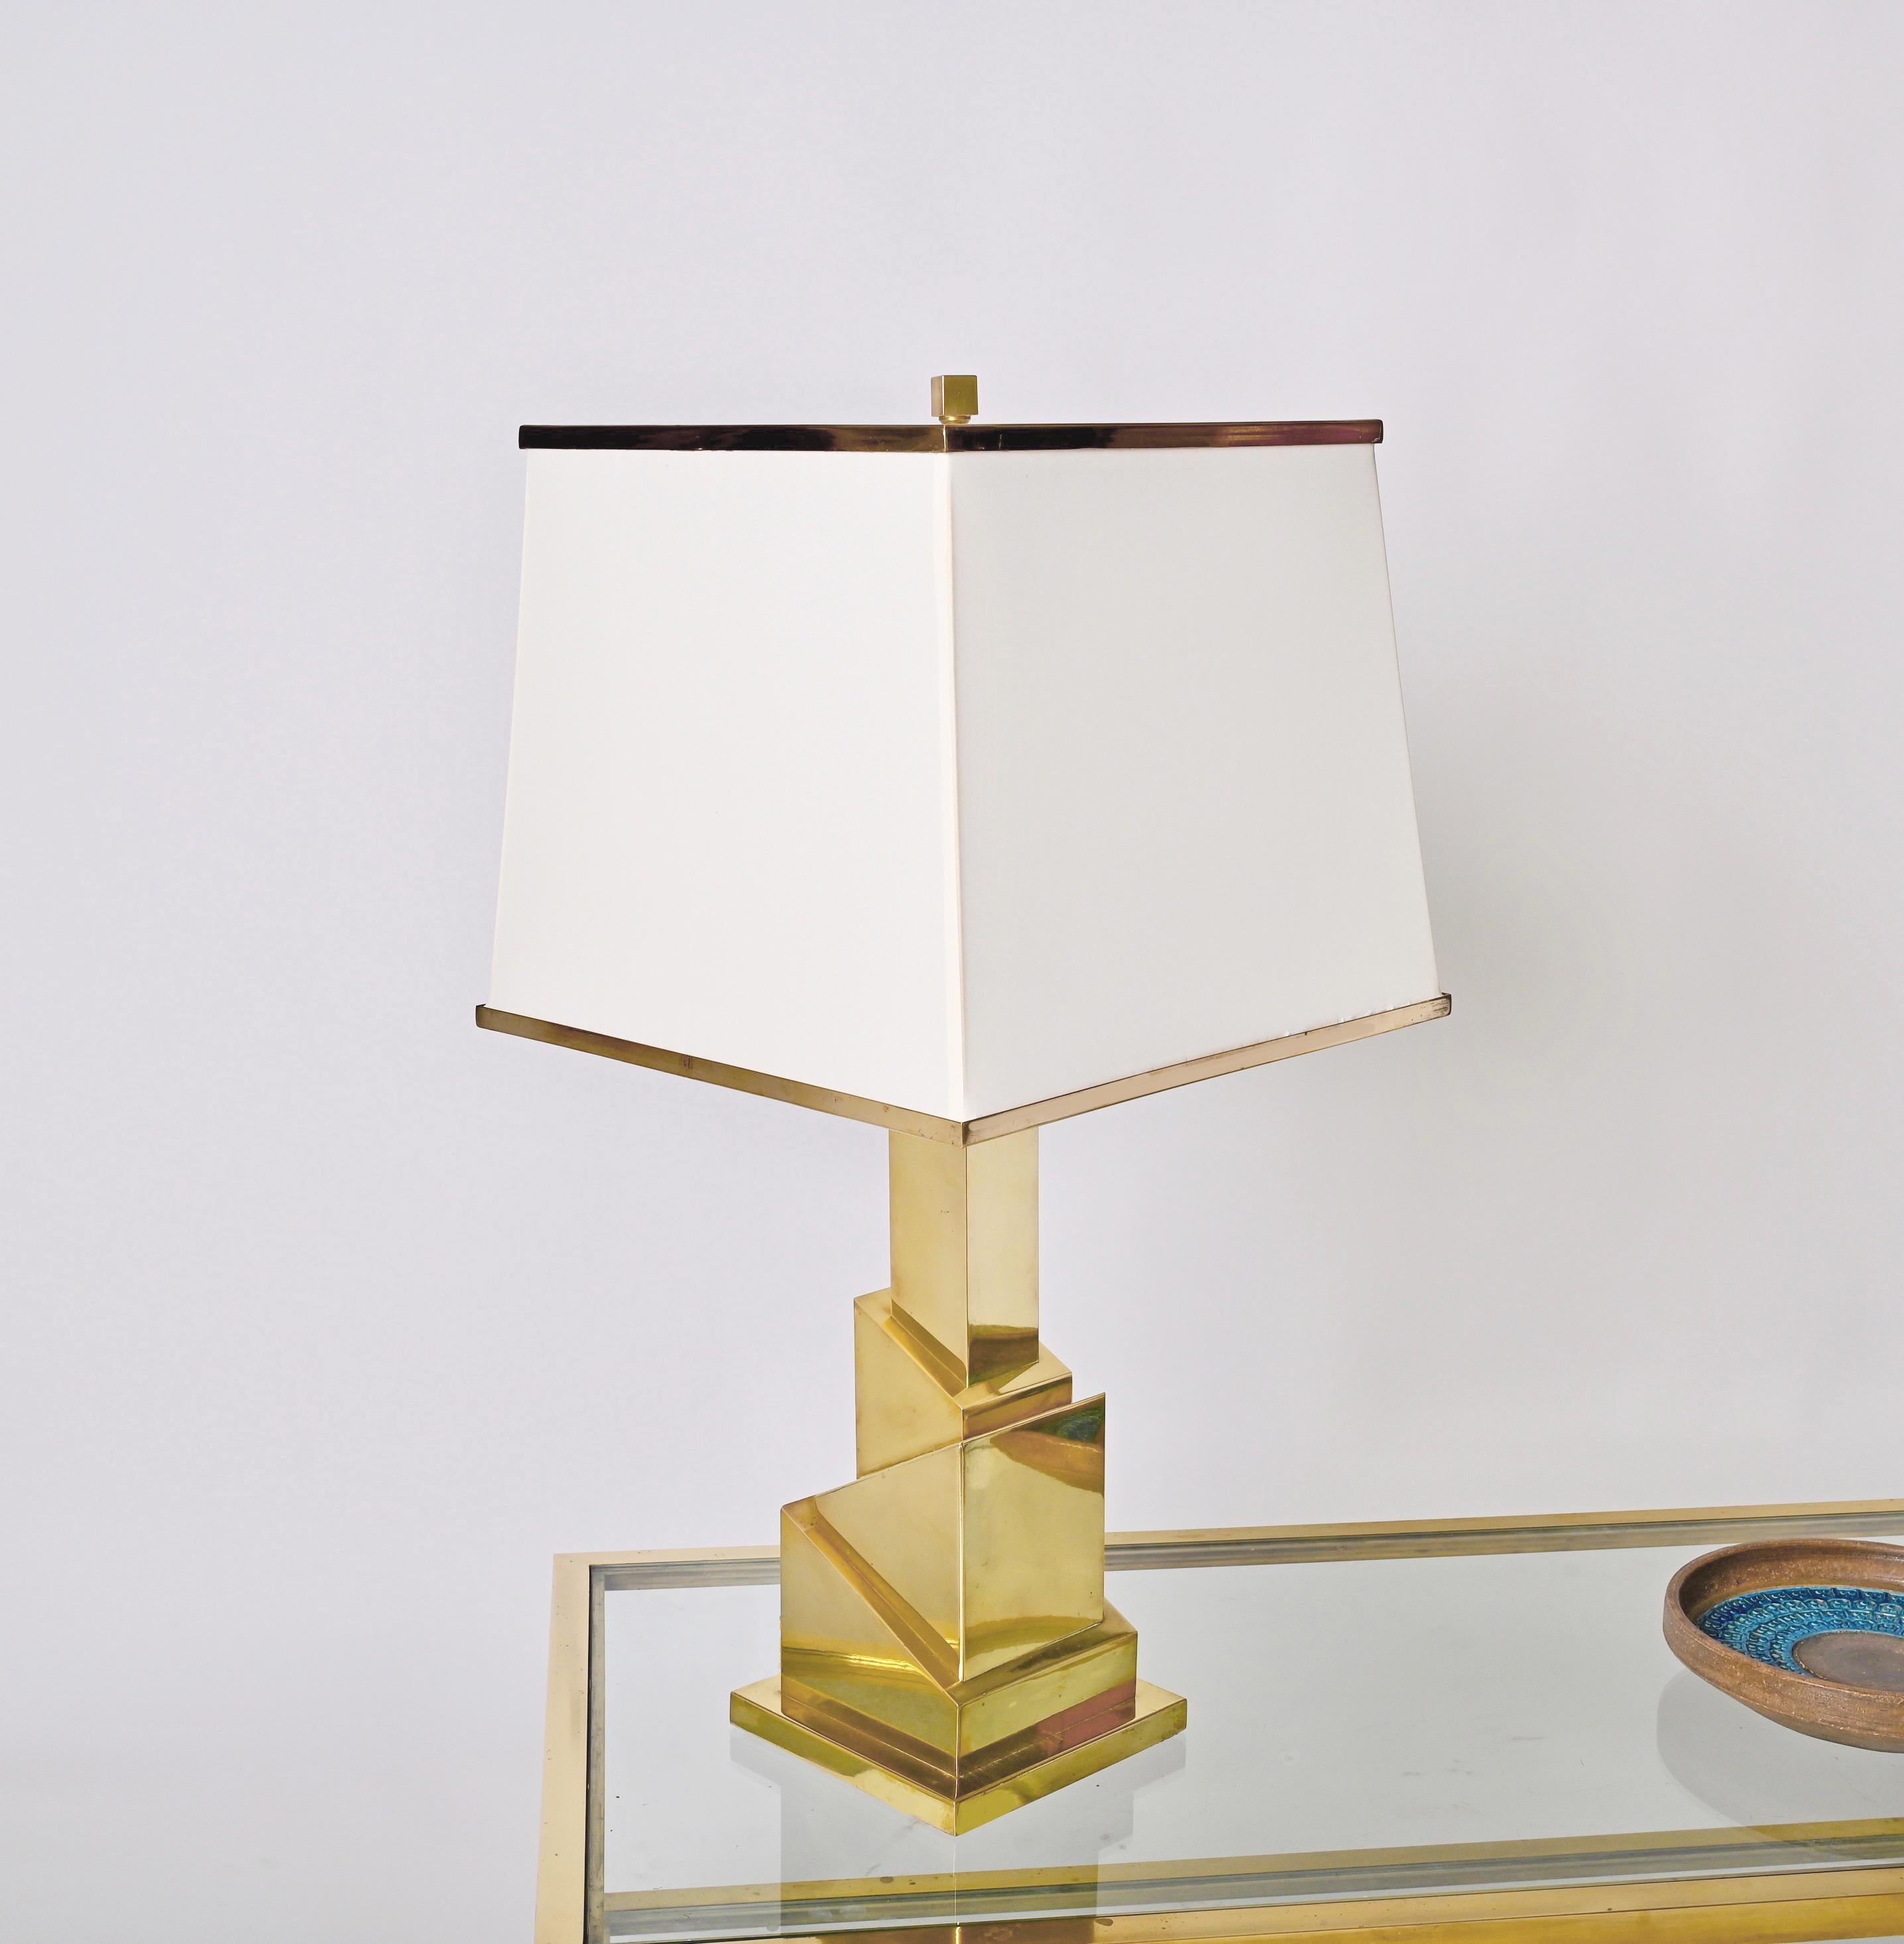 Marvelous skyscraper-shaped table lamp in solid brass with it's original lampshade in white silk. This incredibly rare and unique table lamp was designed and signed by Romeo Rega in Italy during the 1970s and is signed on the base. 

The imaginative